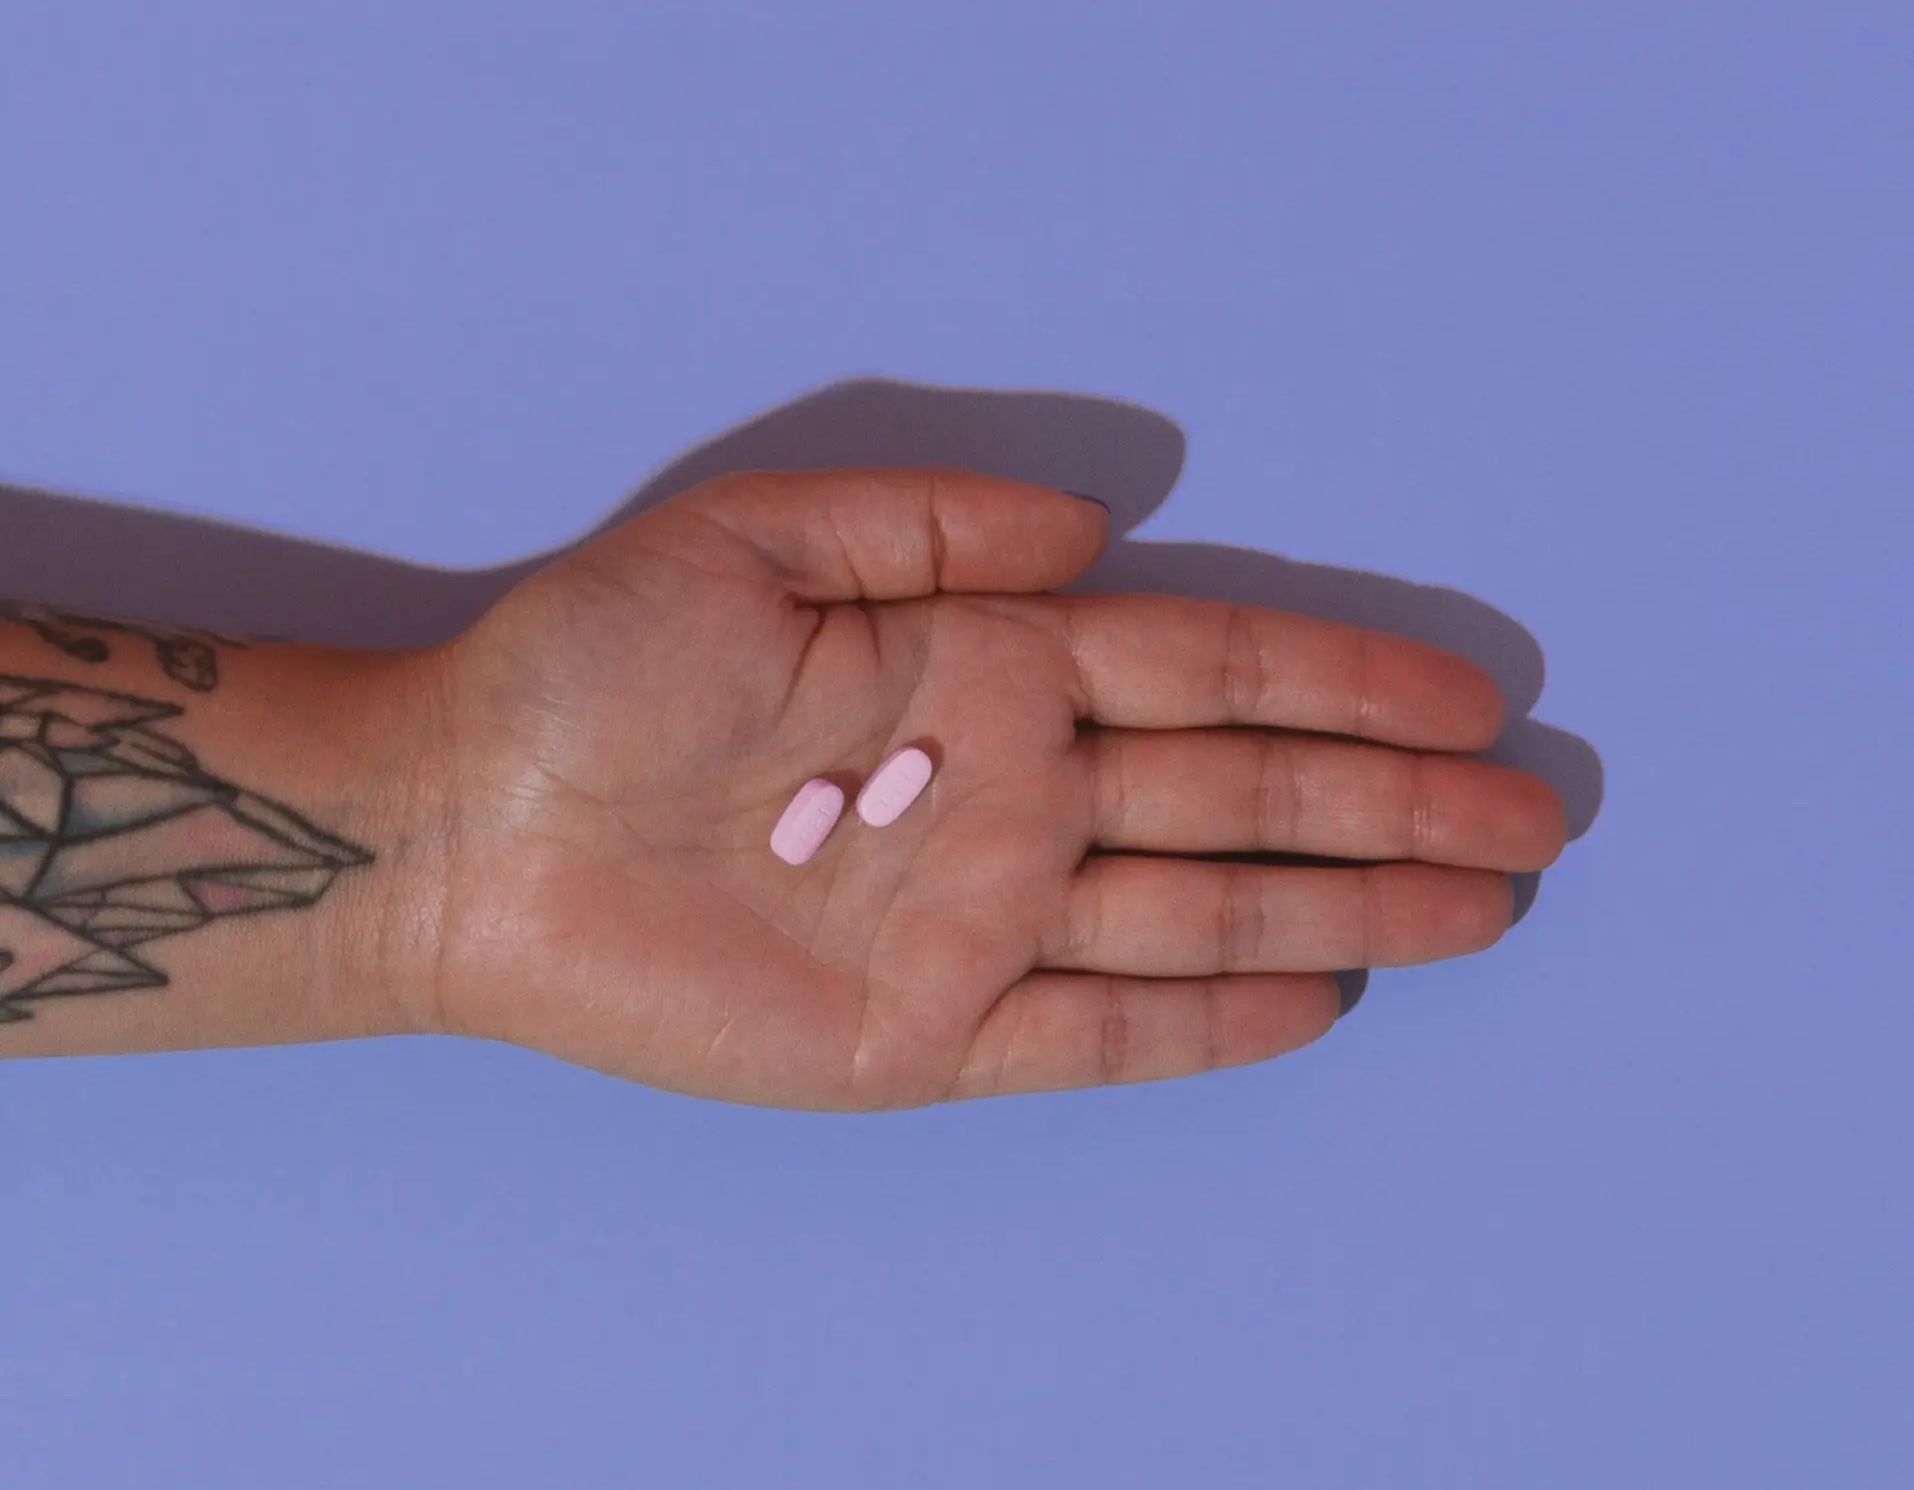 a hand holding two pink pills on a purple background